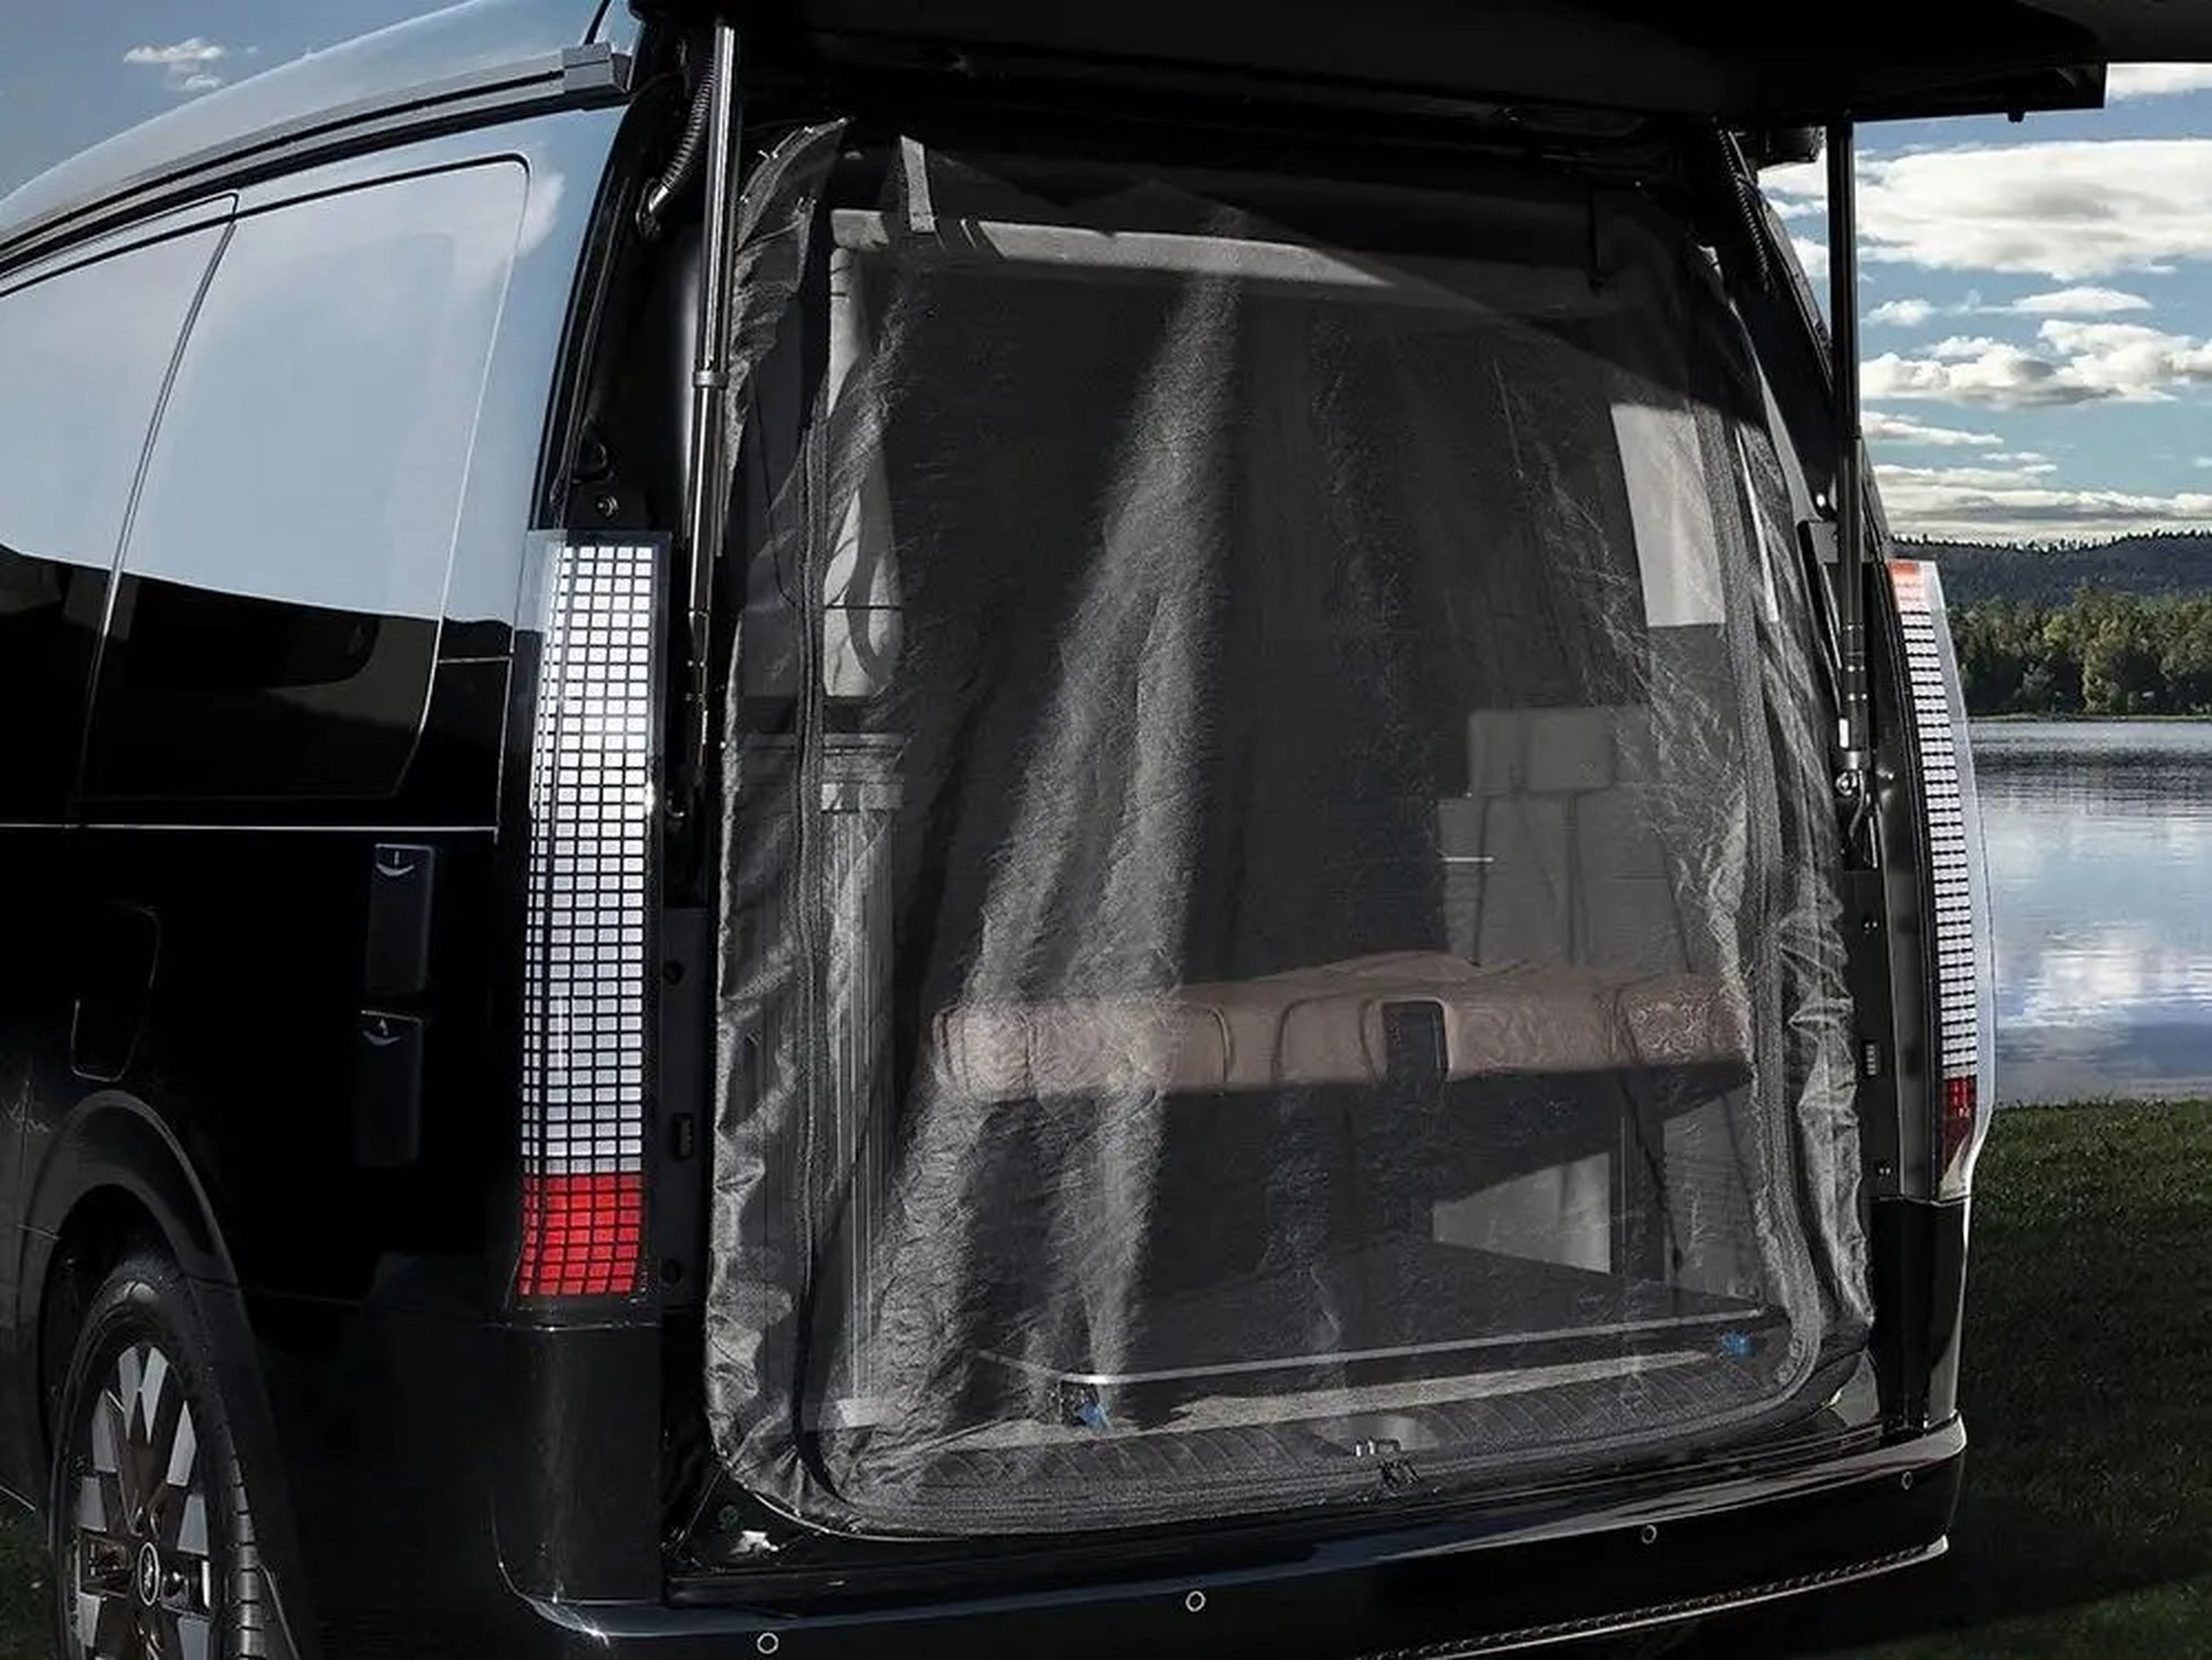 The Hyundai Staria Lounge Camper's mosquito net at the trunk.